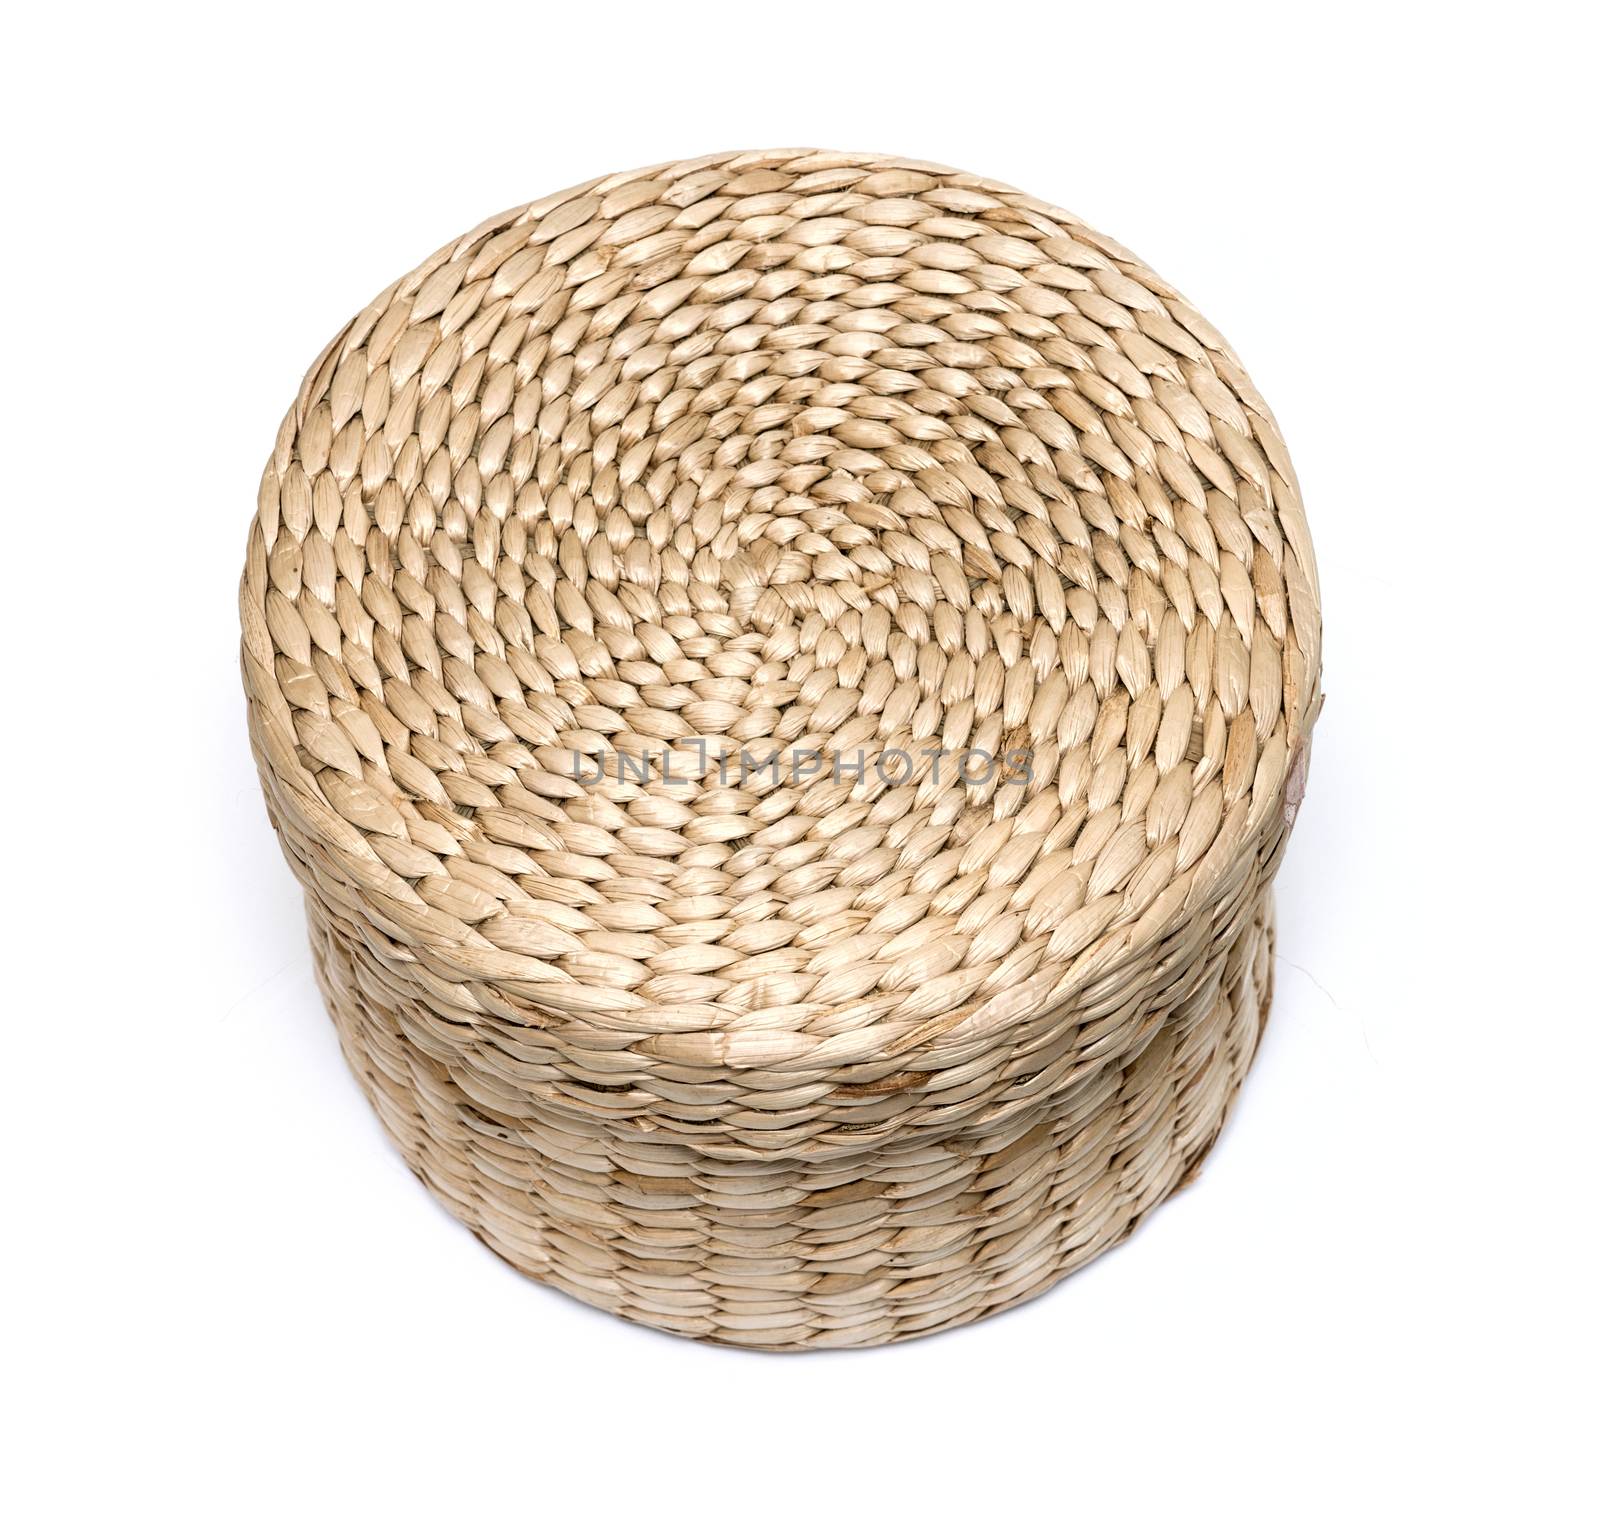 Small closed wicker box isolated on white